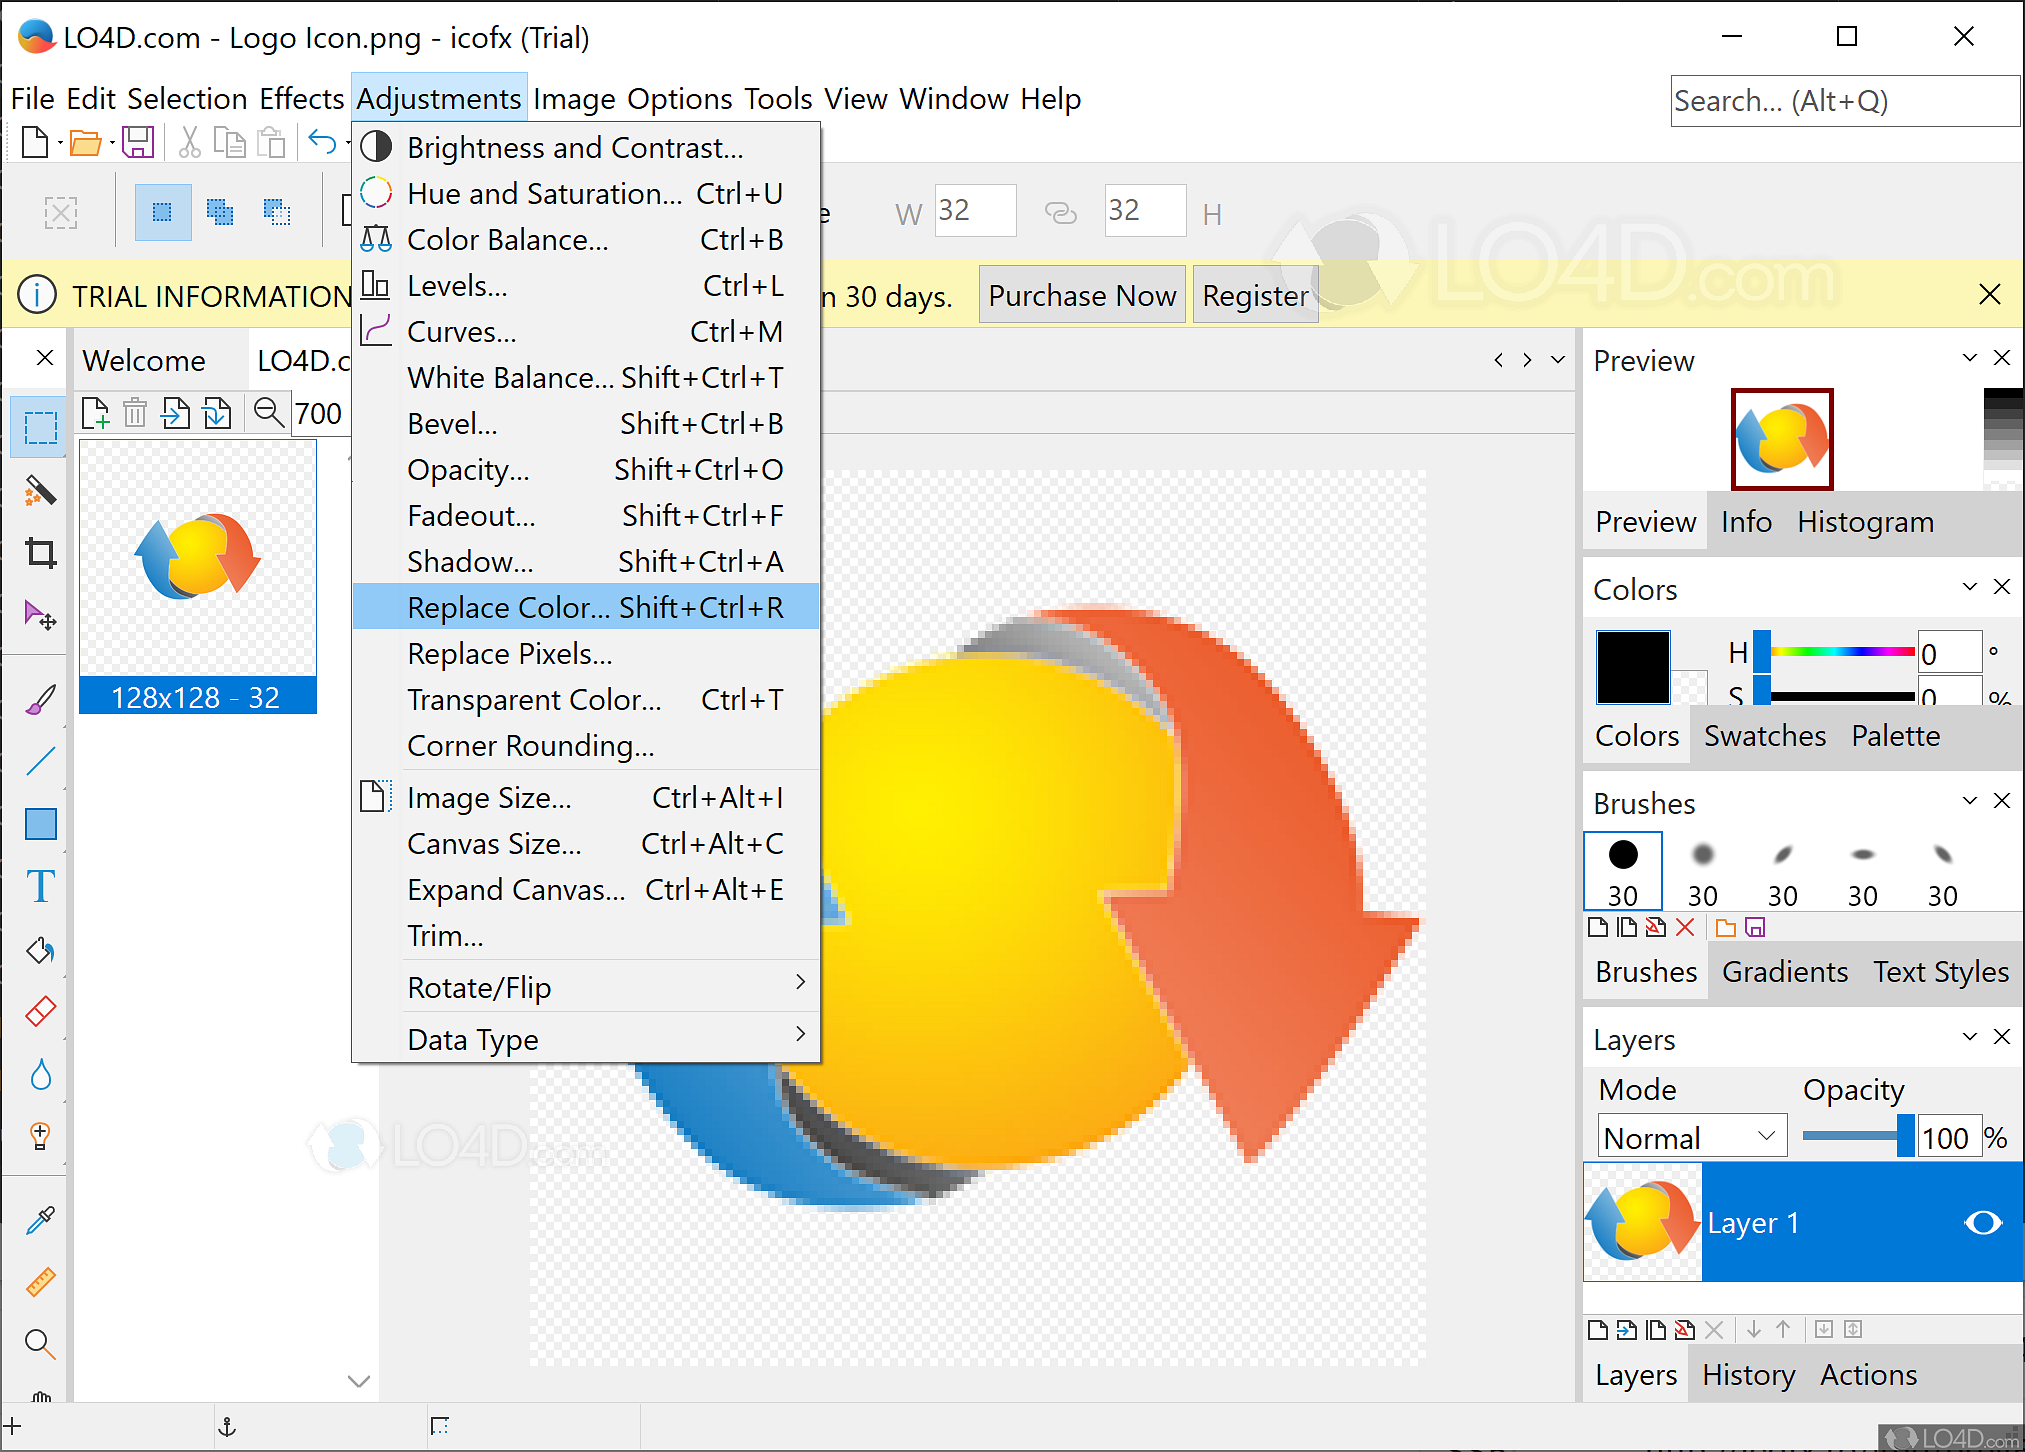 download the new version for windows IcoFX 3.9.0